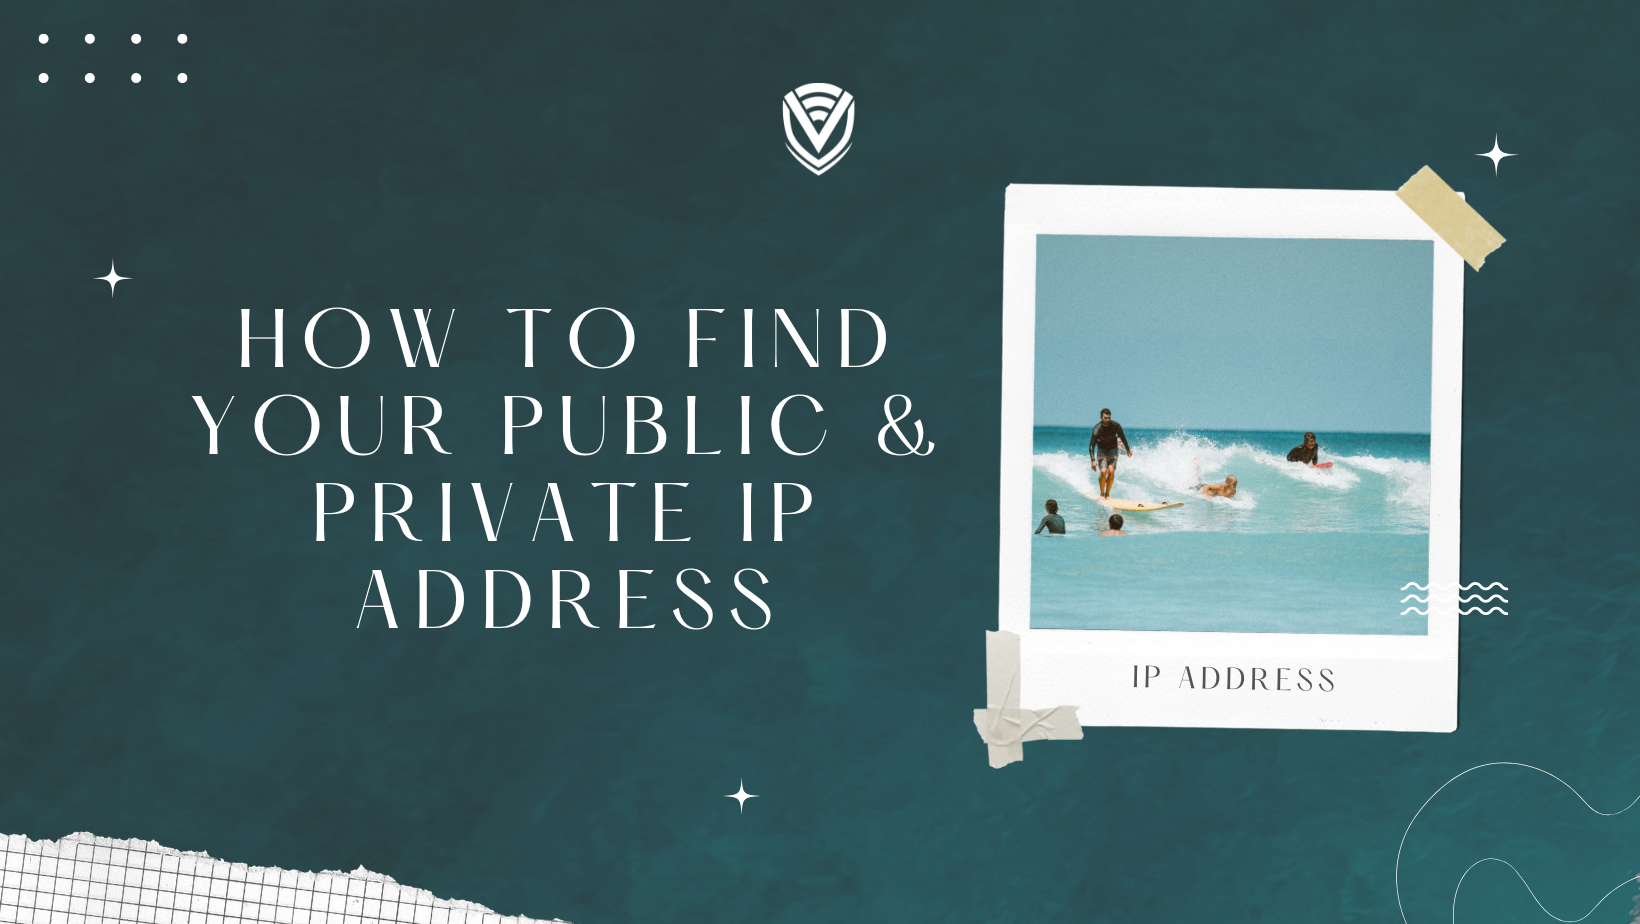 How To Find Your Public & Private IP Address